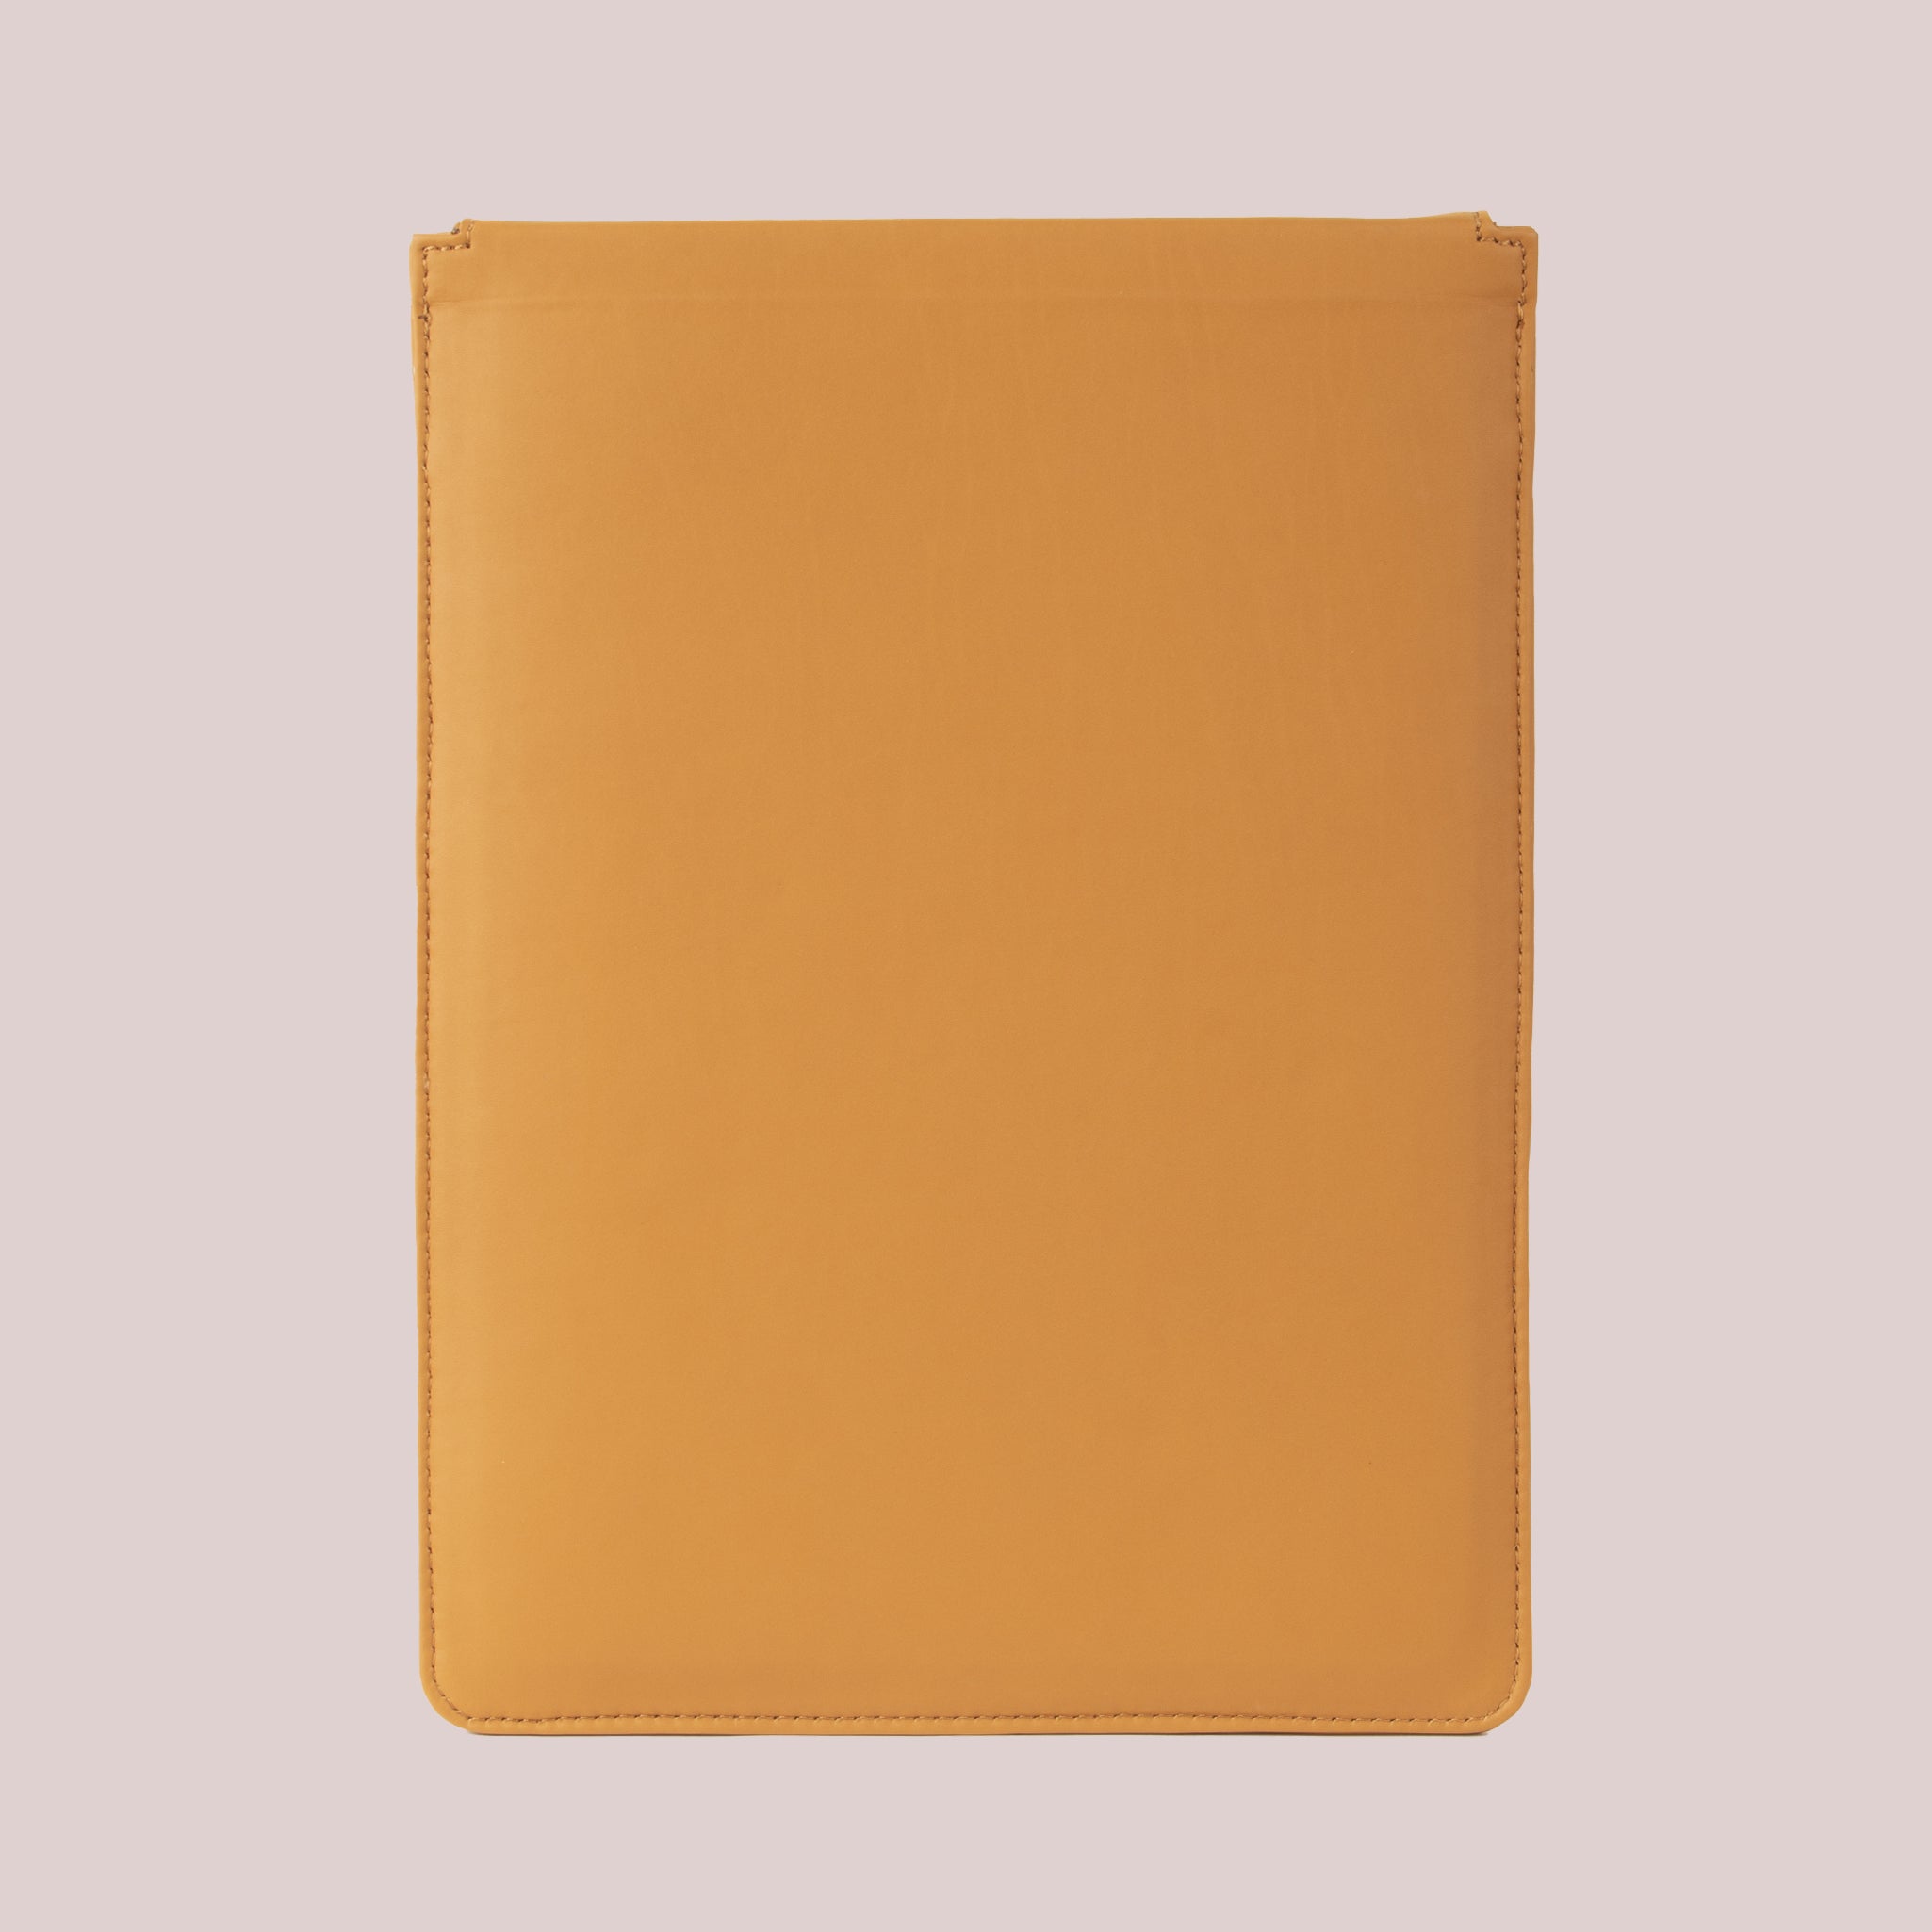 Buy Macbook 14 Pro leather case in Yellow color